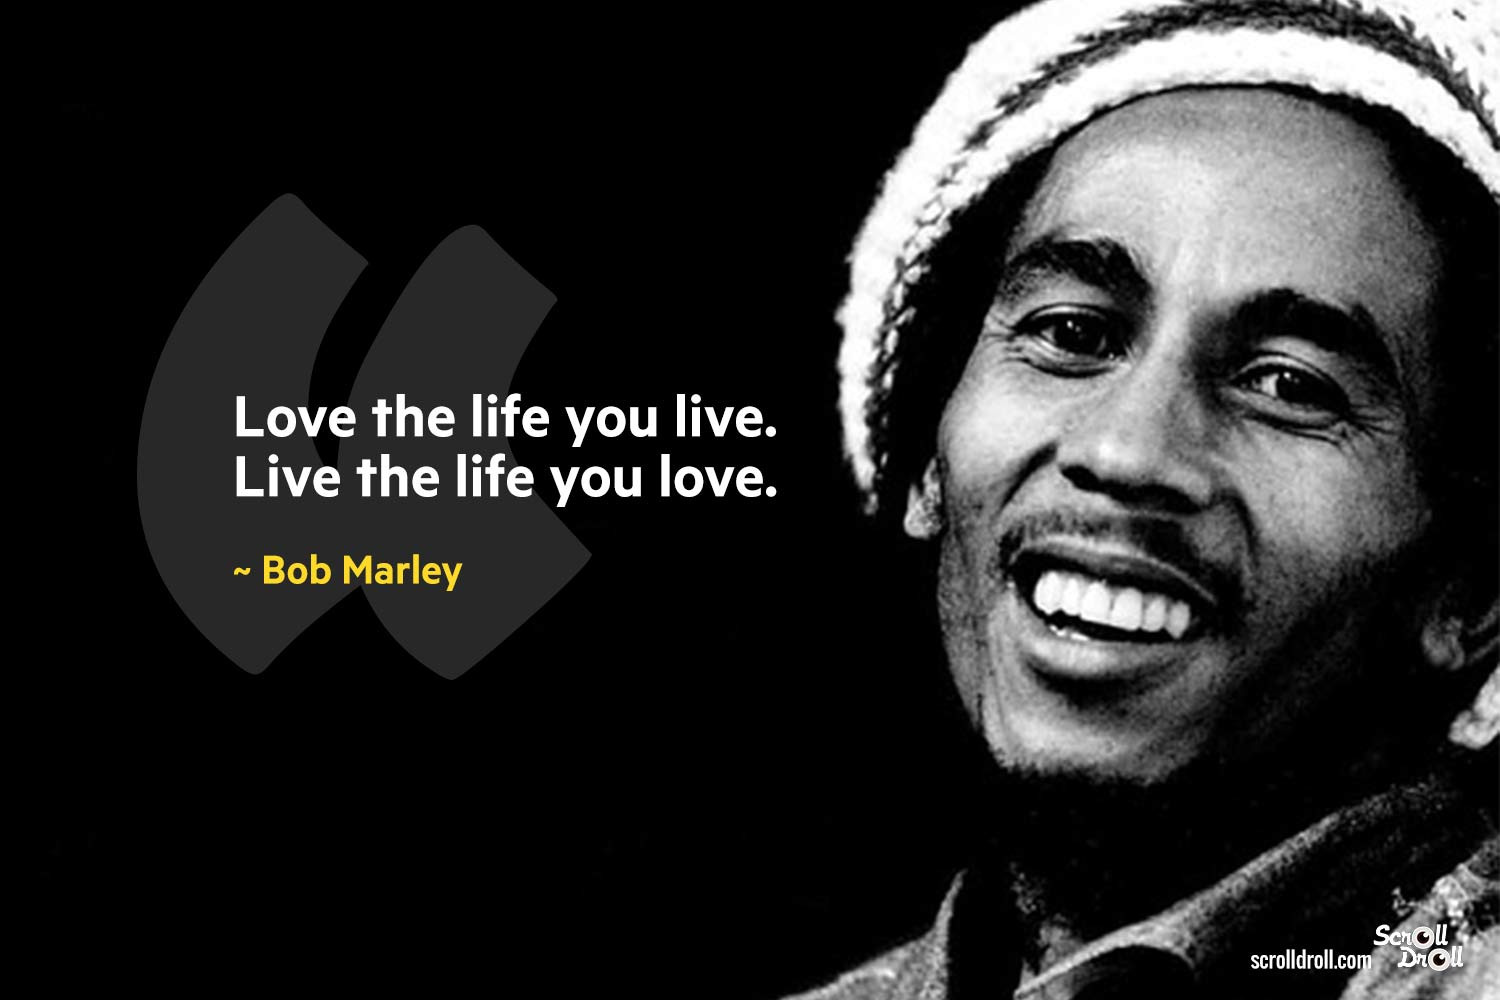 Bob Marley Quotes Love
 12 Best Bob Marley Quotes About Love Music & Life